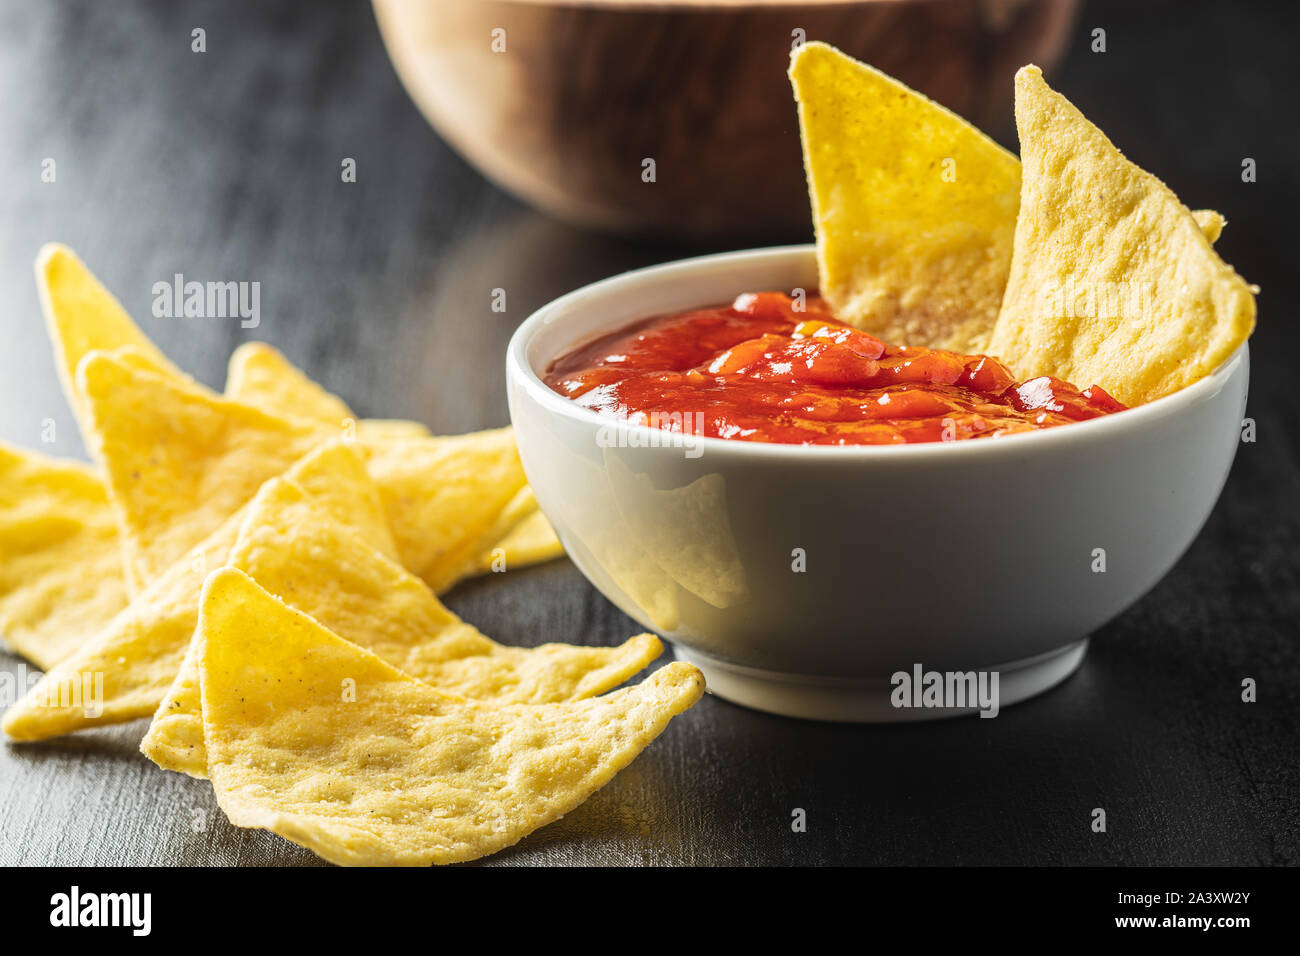 Corn nacho chips and tomato dip. Yellow tortilla chips and salsa on black table. Stock Photo